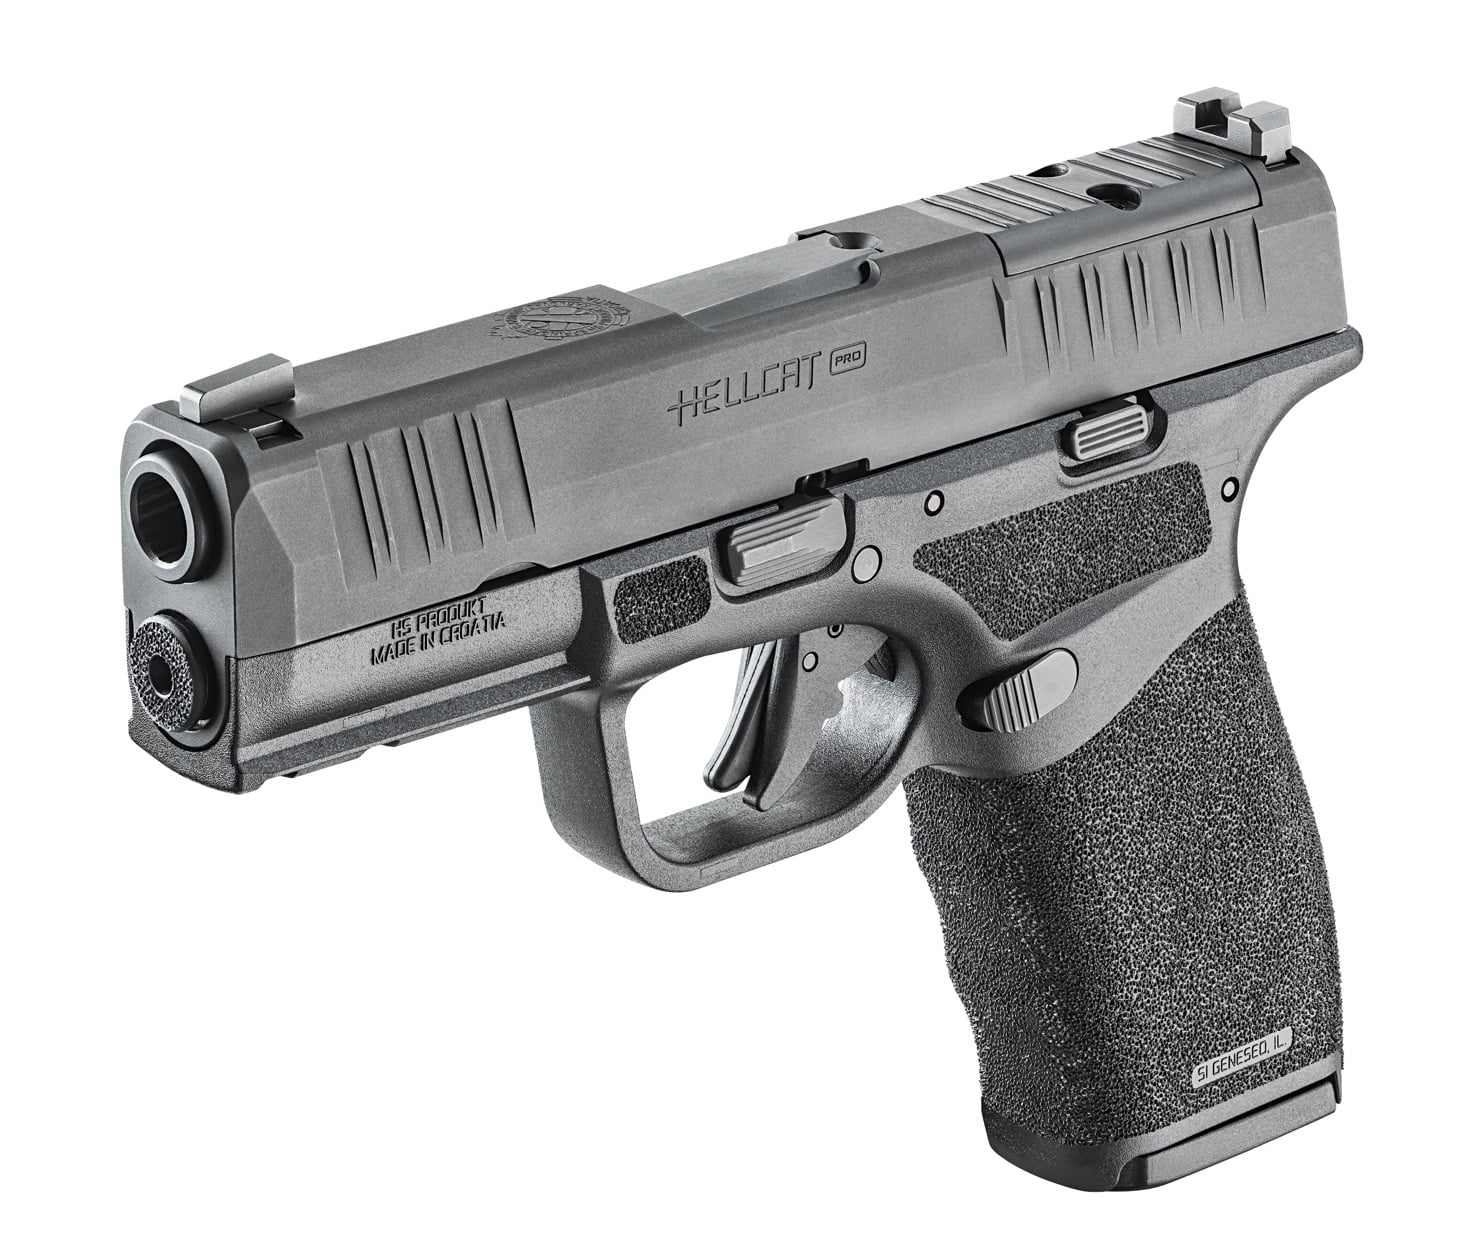 In this digital images, we see the original Springfield Armory Hellcat Pro with a black finish. We can also see the iron sights, trigger and pistol slide. The frame is polymer.